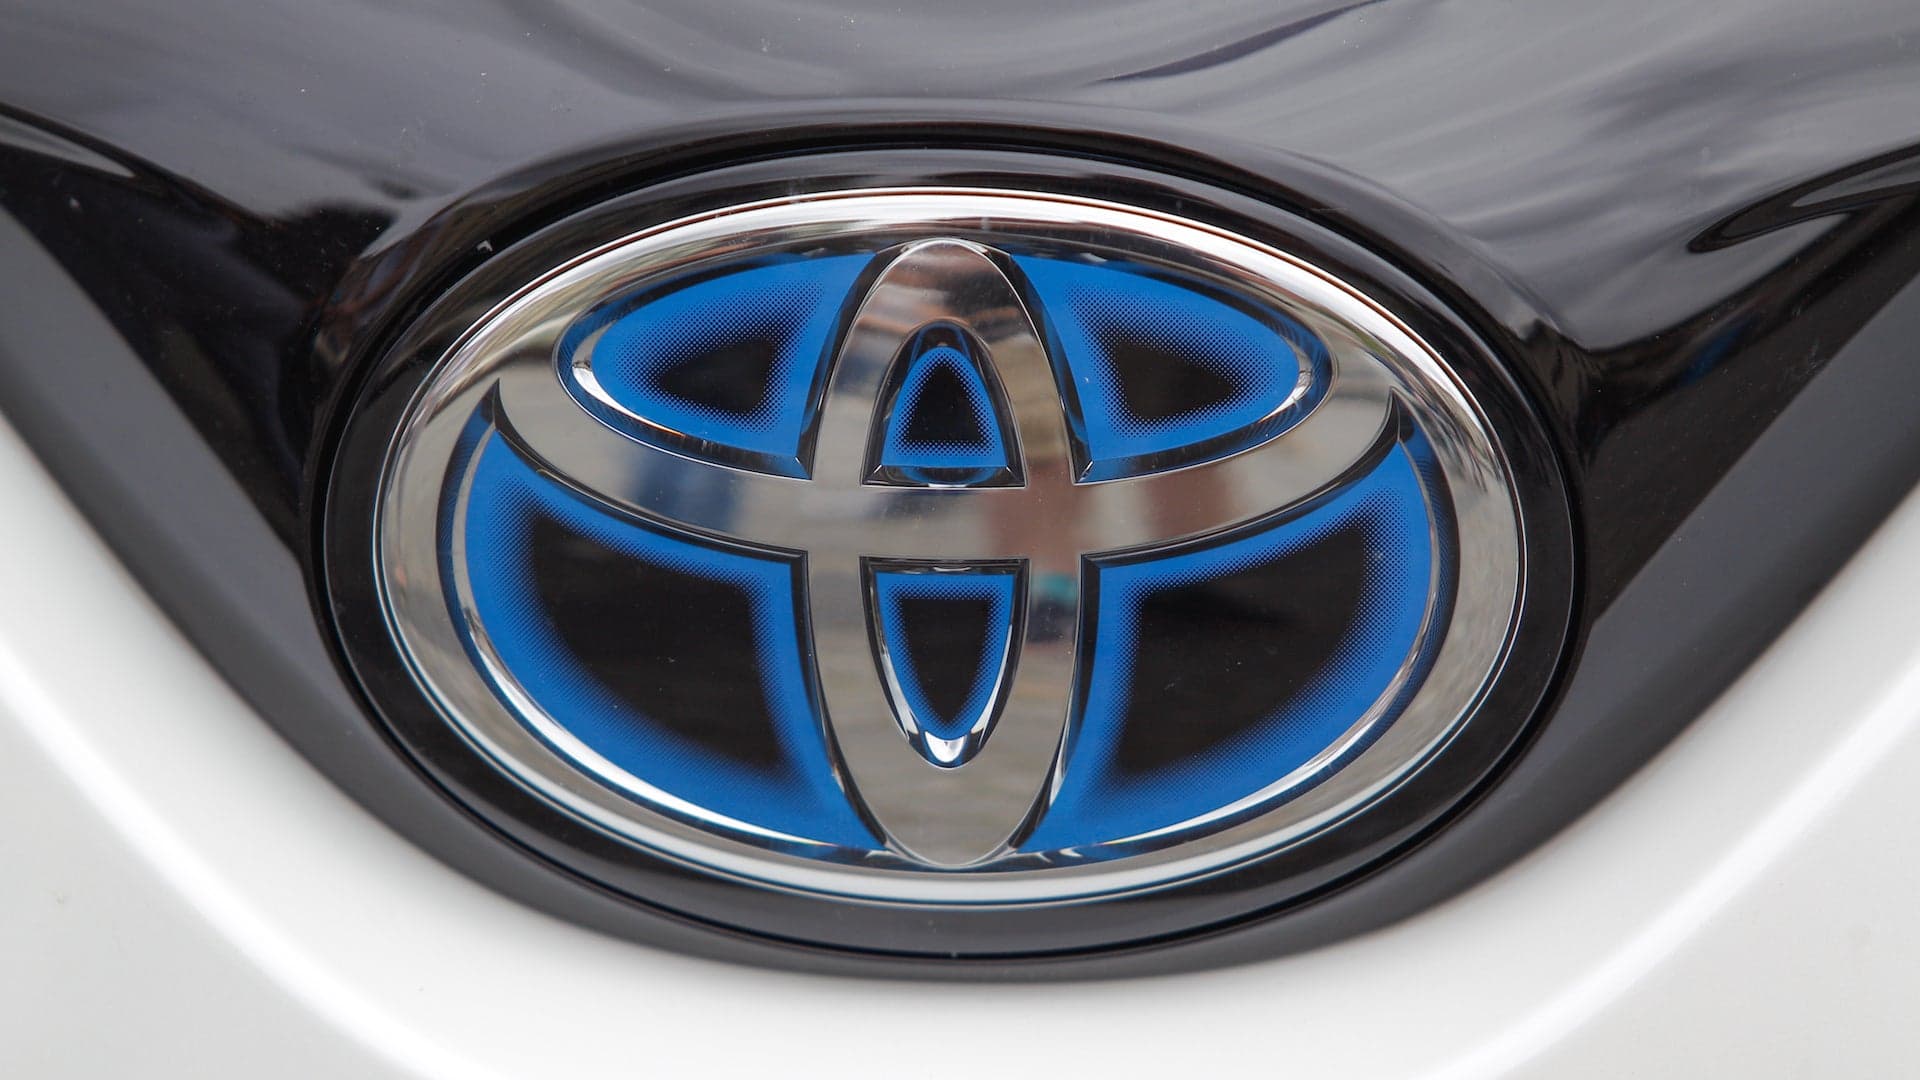 Toyota Files Patent for ‘Flying Car’ With Wheels Doubling as Rotors